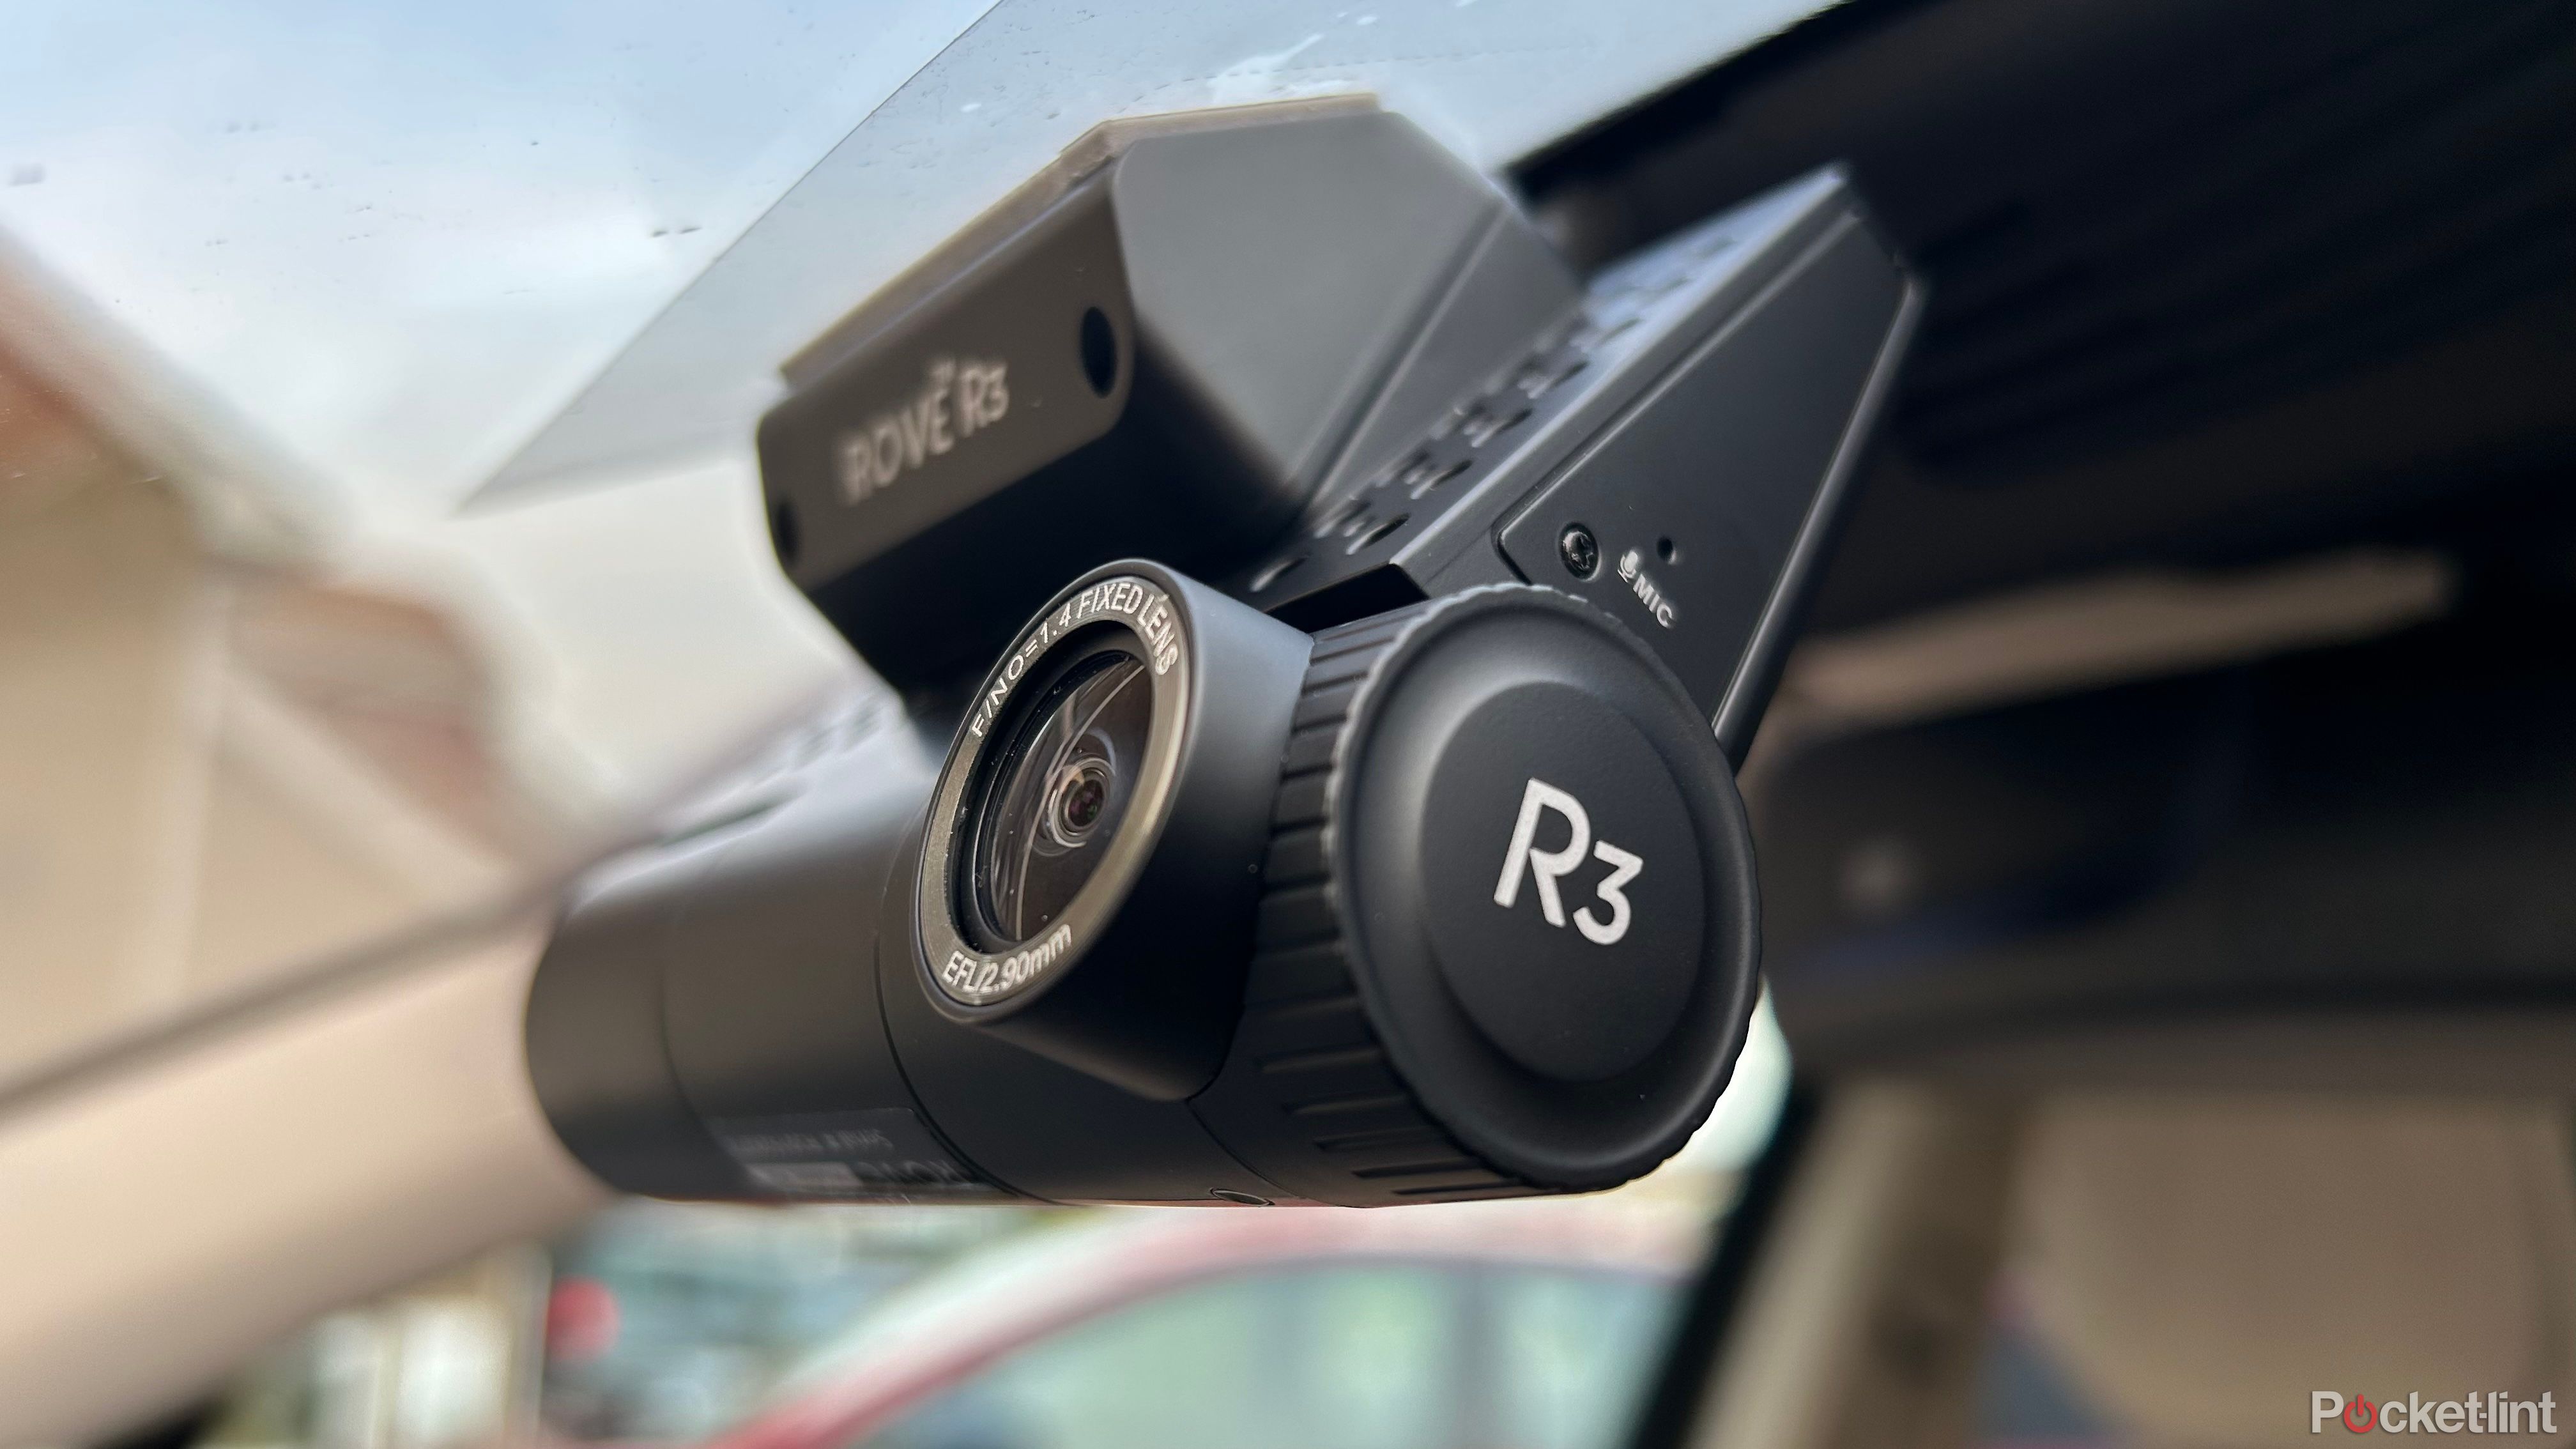 Rove R3 dashcam review: One-stop safety and security